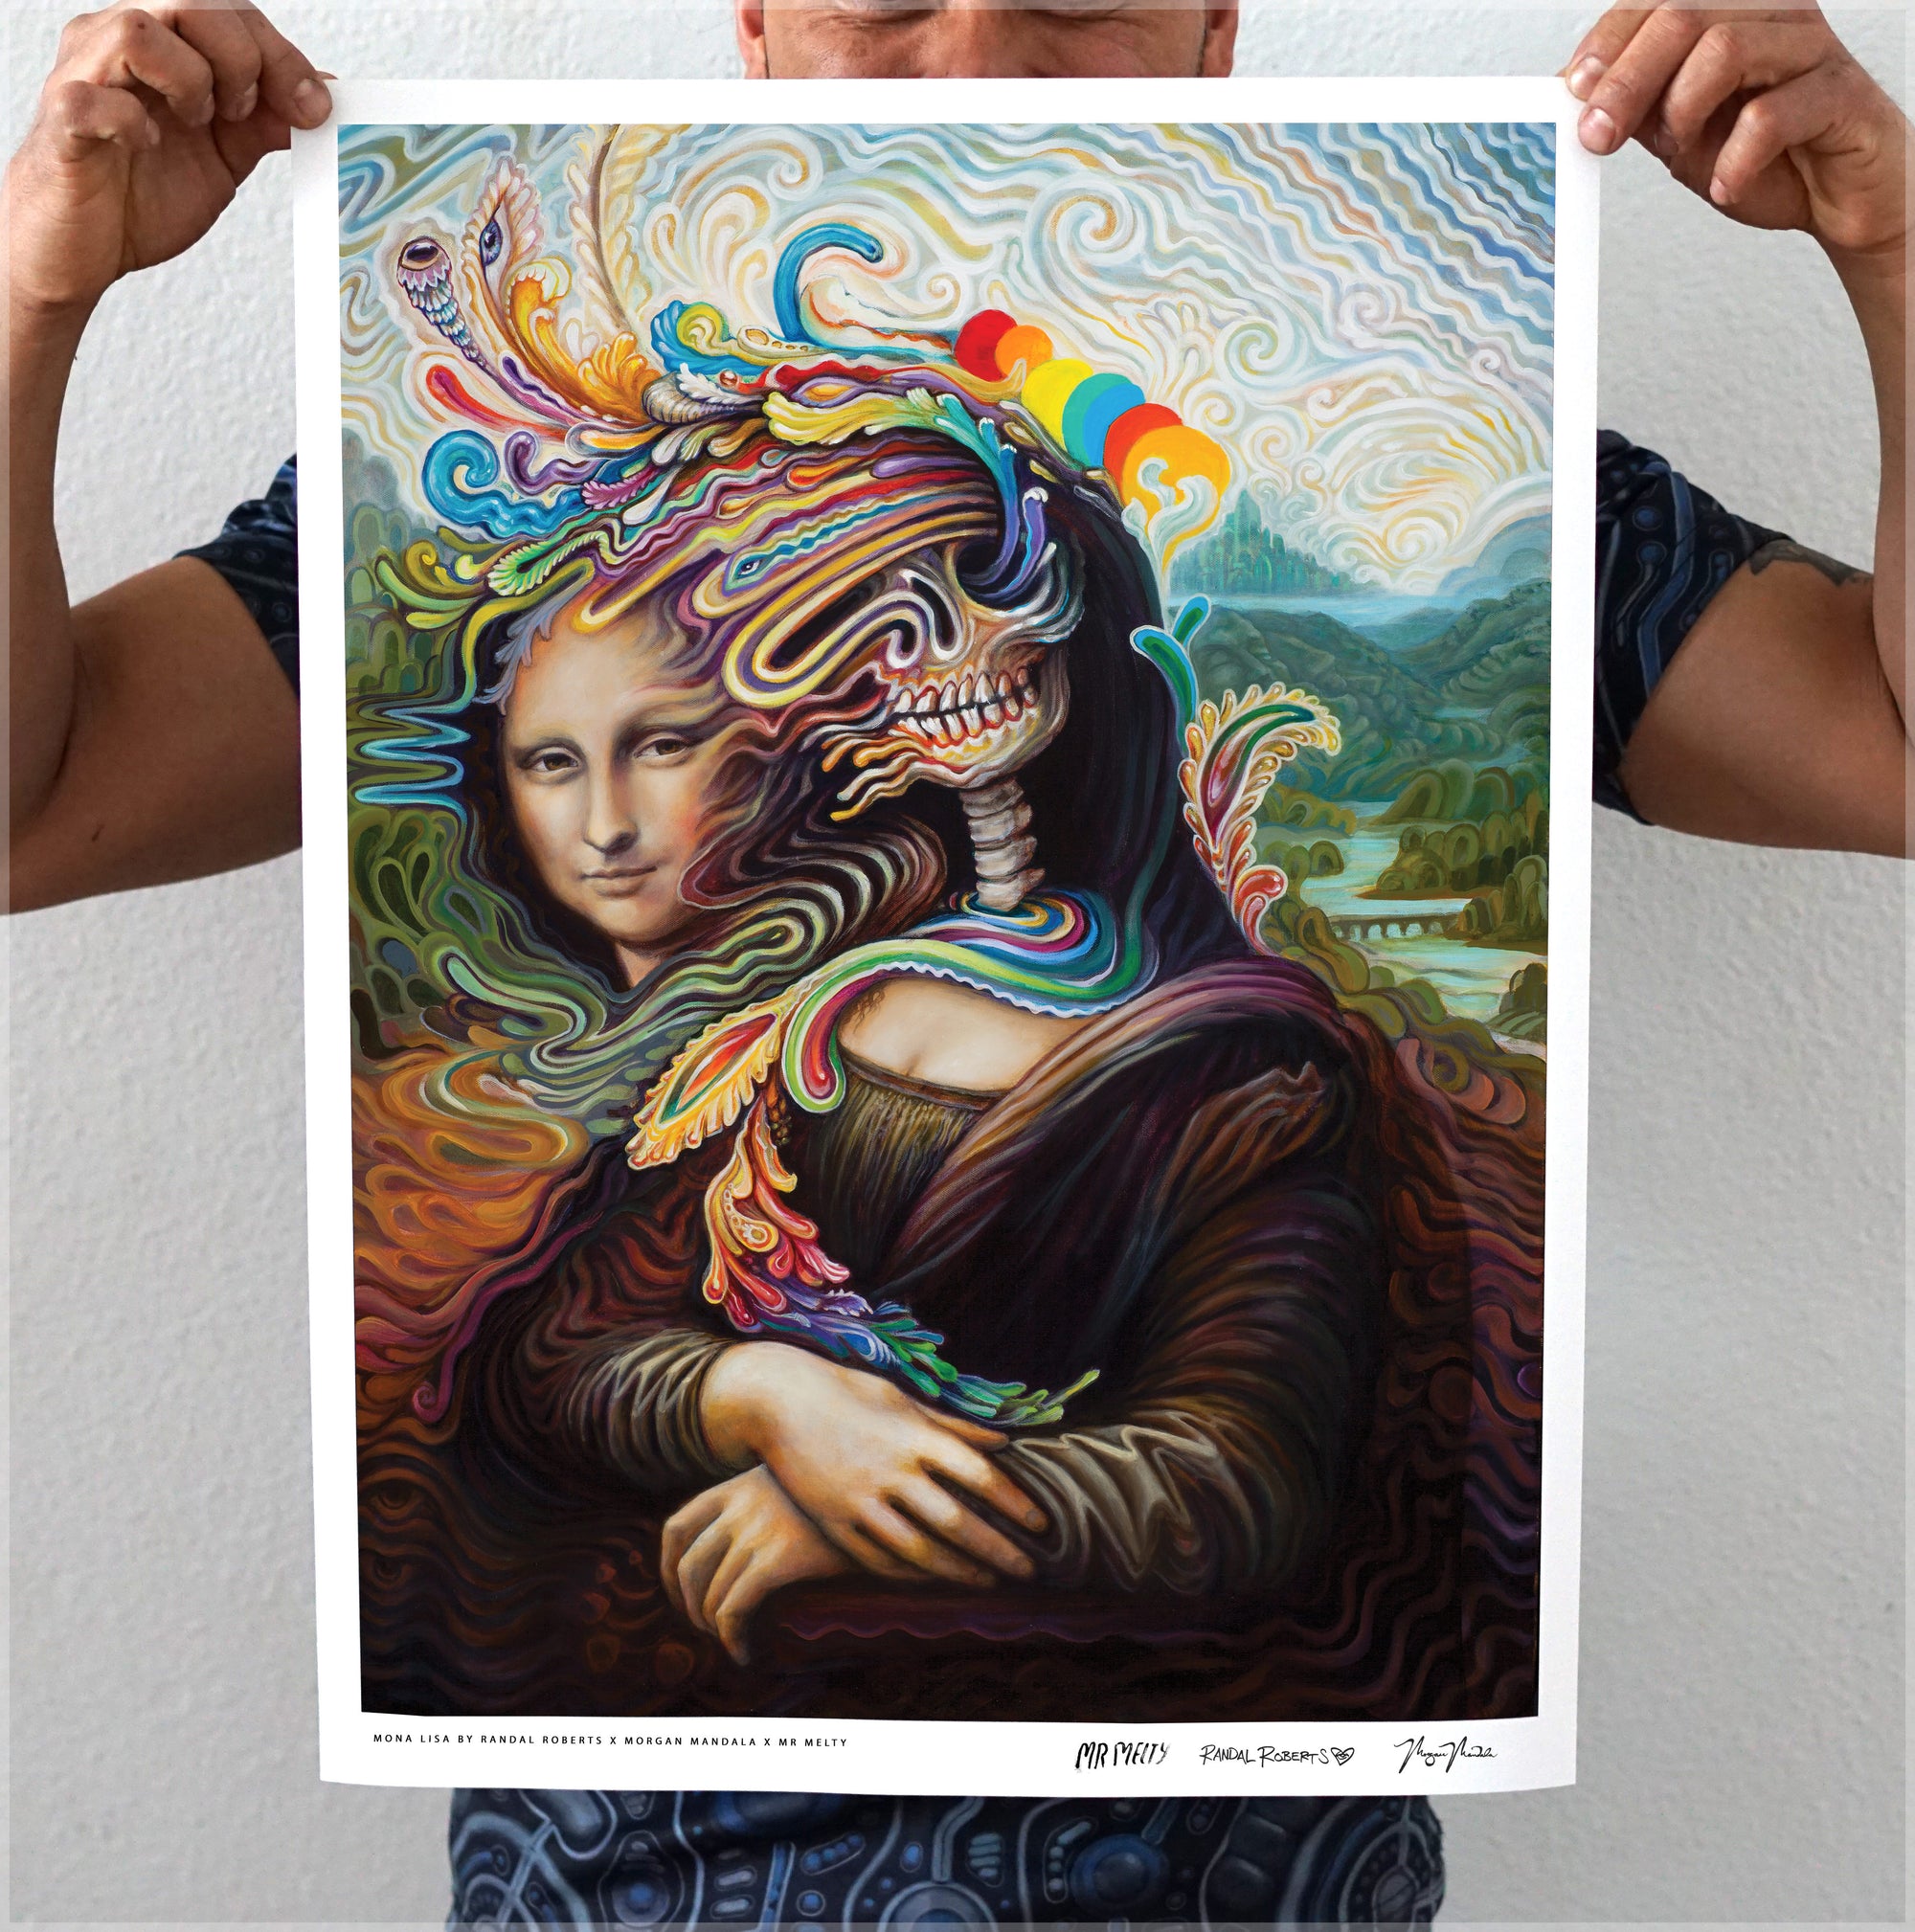 Melty Lisa Signed Print by Mr. Melty, Randal Roberts, and Morgan Mandala - 24 Hour Release